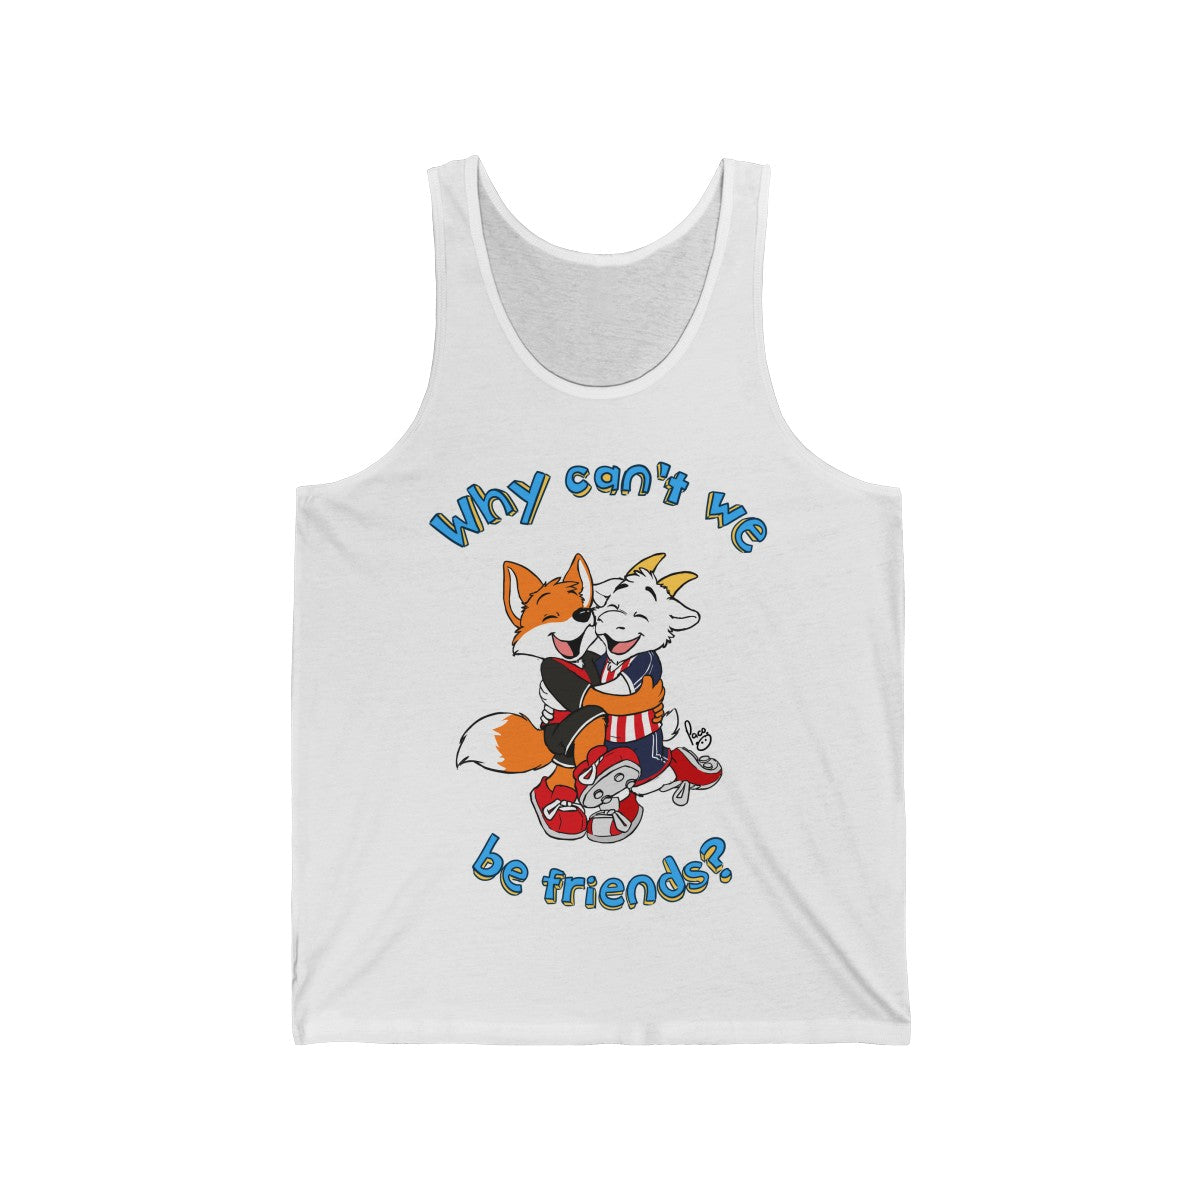 Why Can't we be Friends 2? - Tank Top Tank Top Paco Panda White XS 